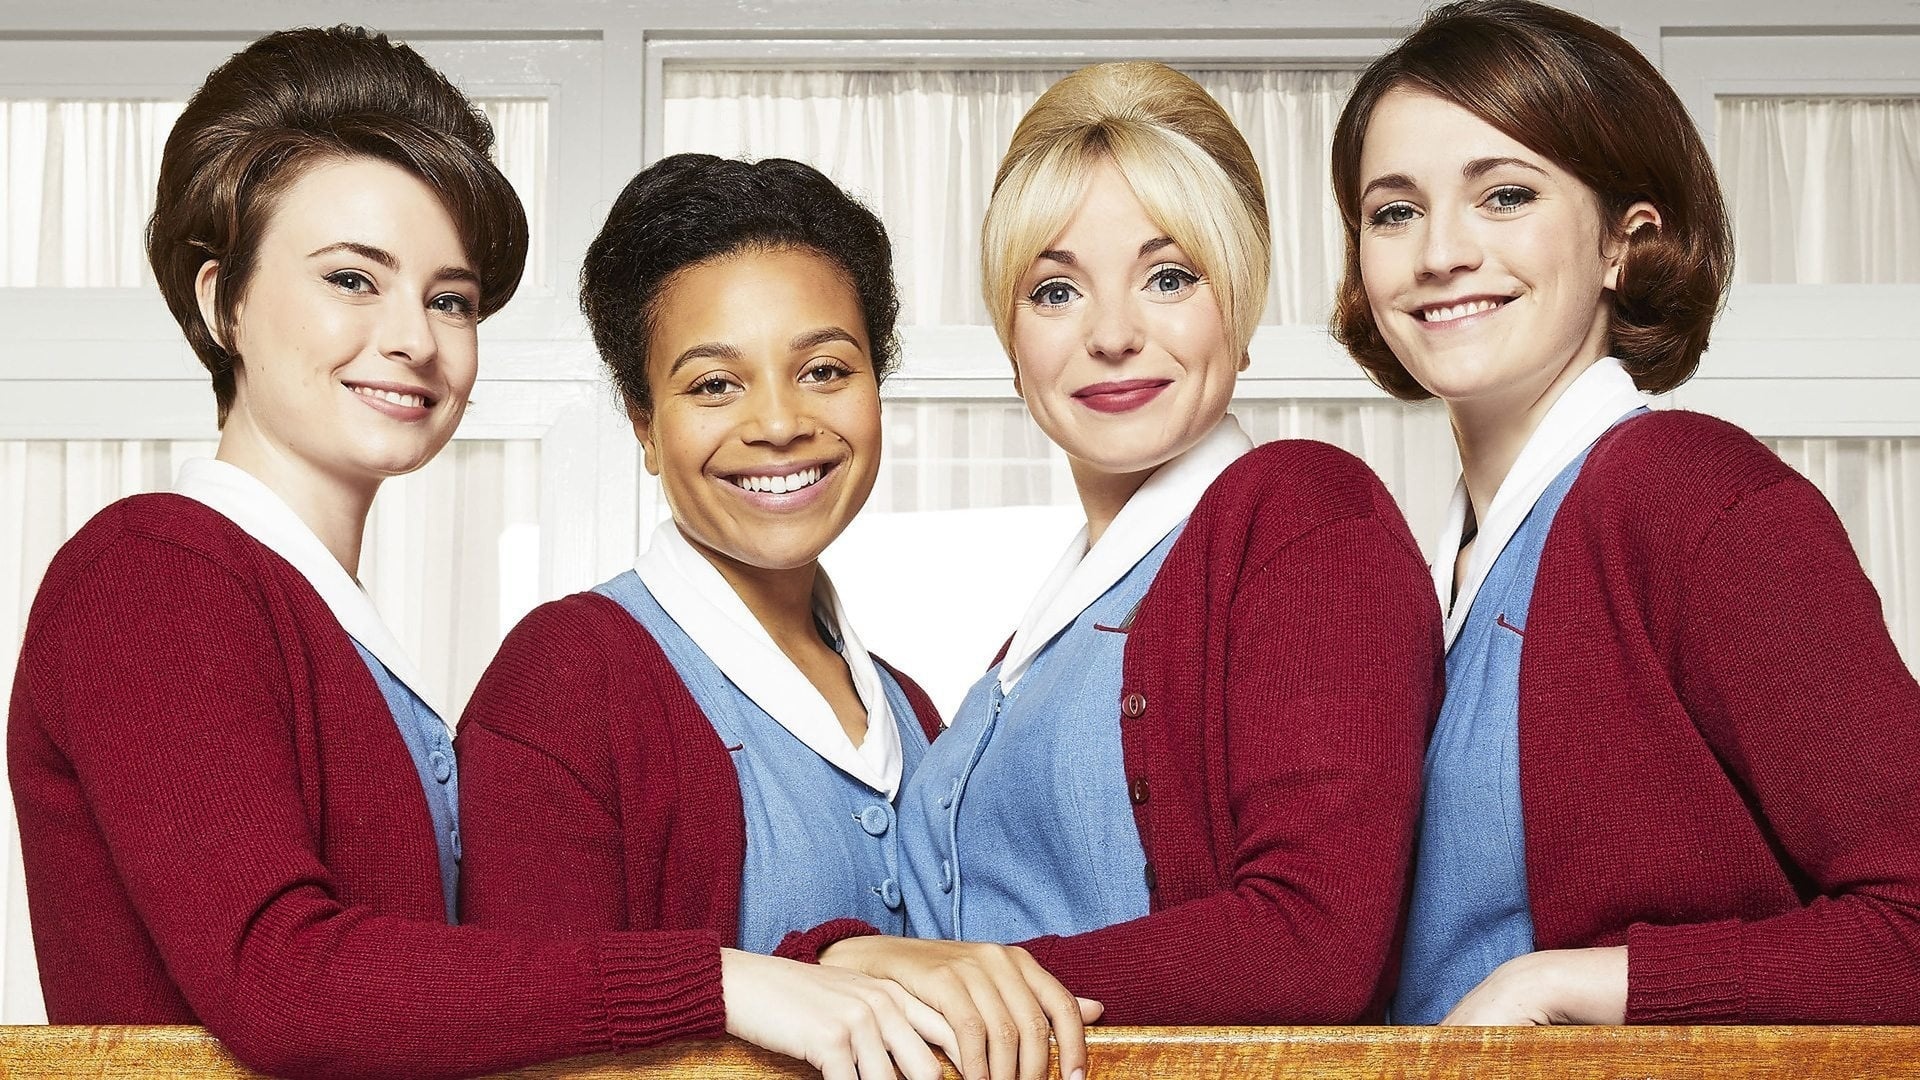 Call the Midwife, TV series, 2012 backdrops, Movie database, 1920x1080 Full HD Desktop